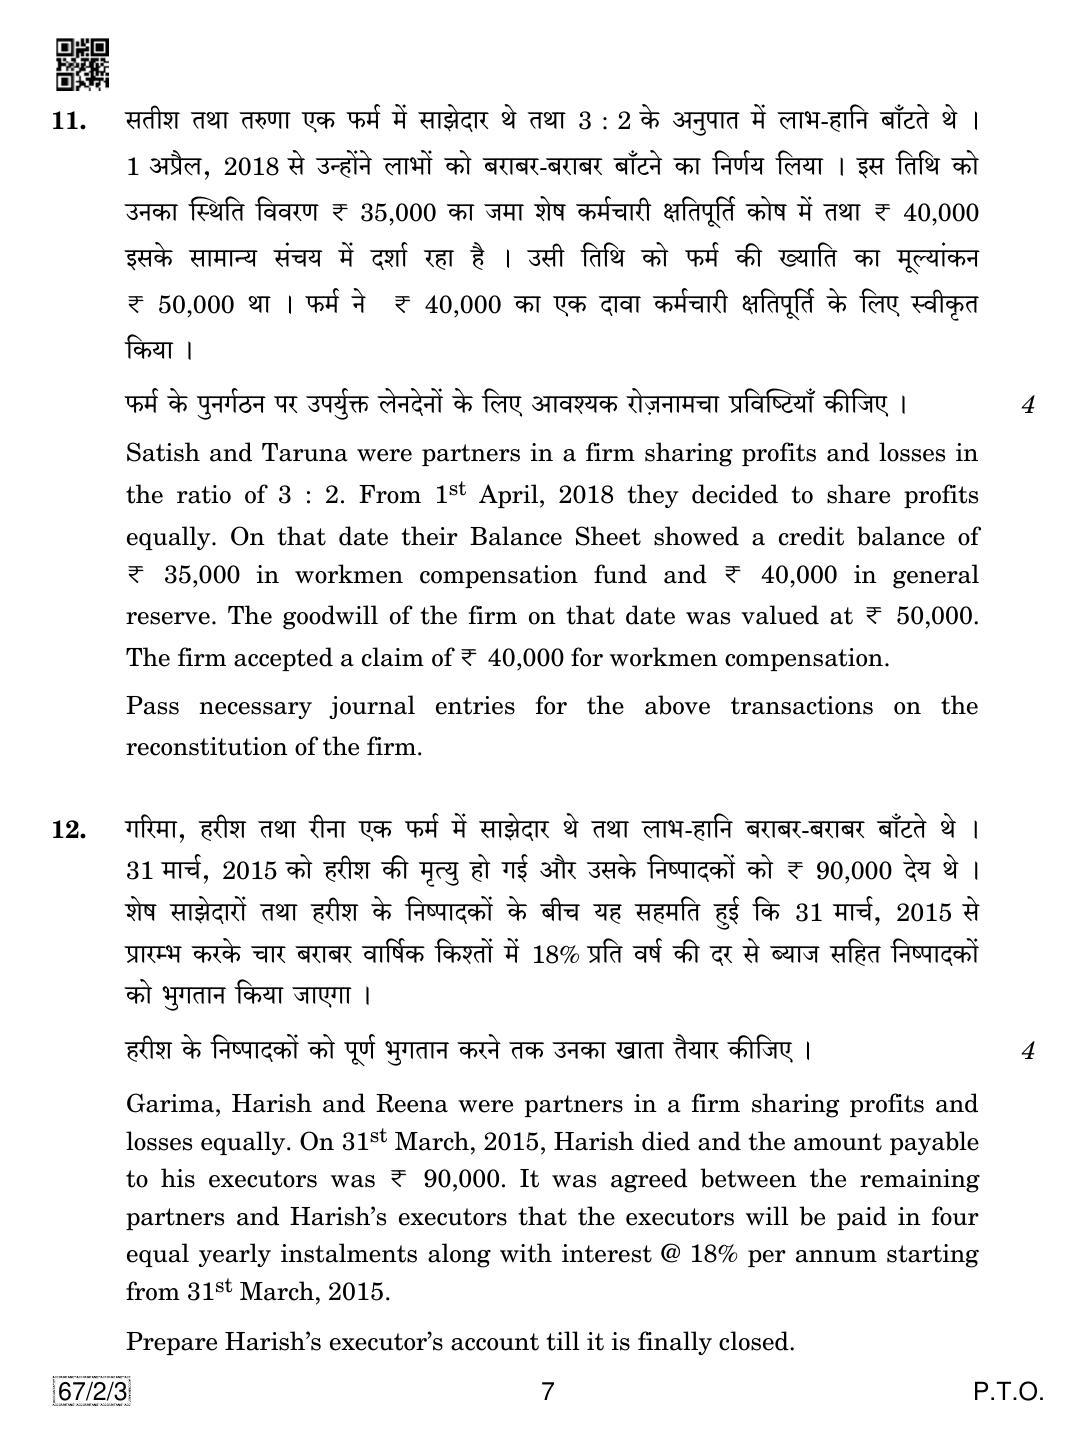 CBSE Class 12 67-2-3 Accountancy 2019 Question Paper - Page 7